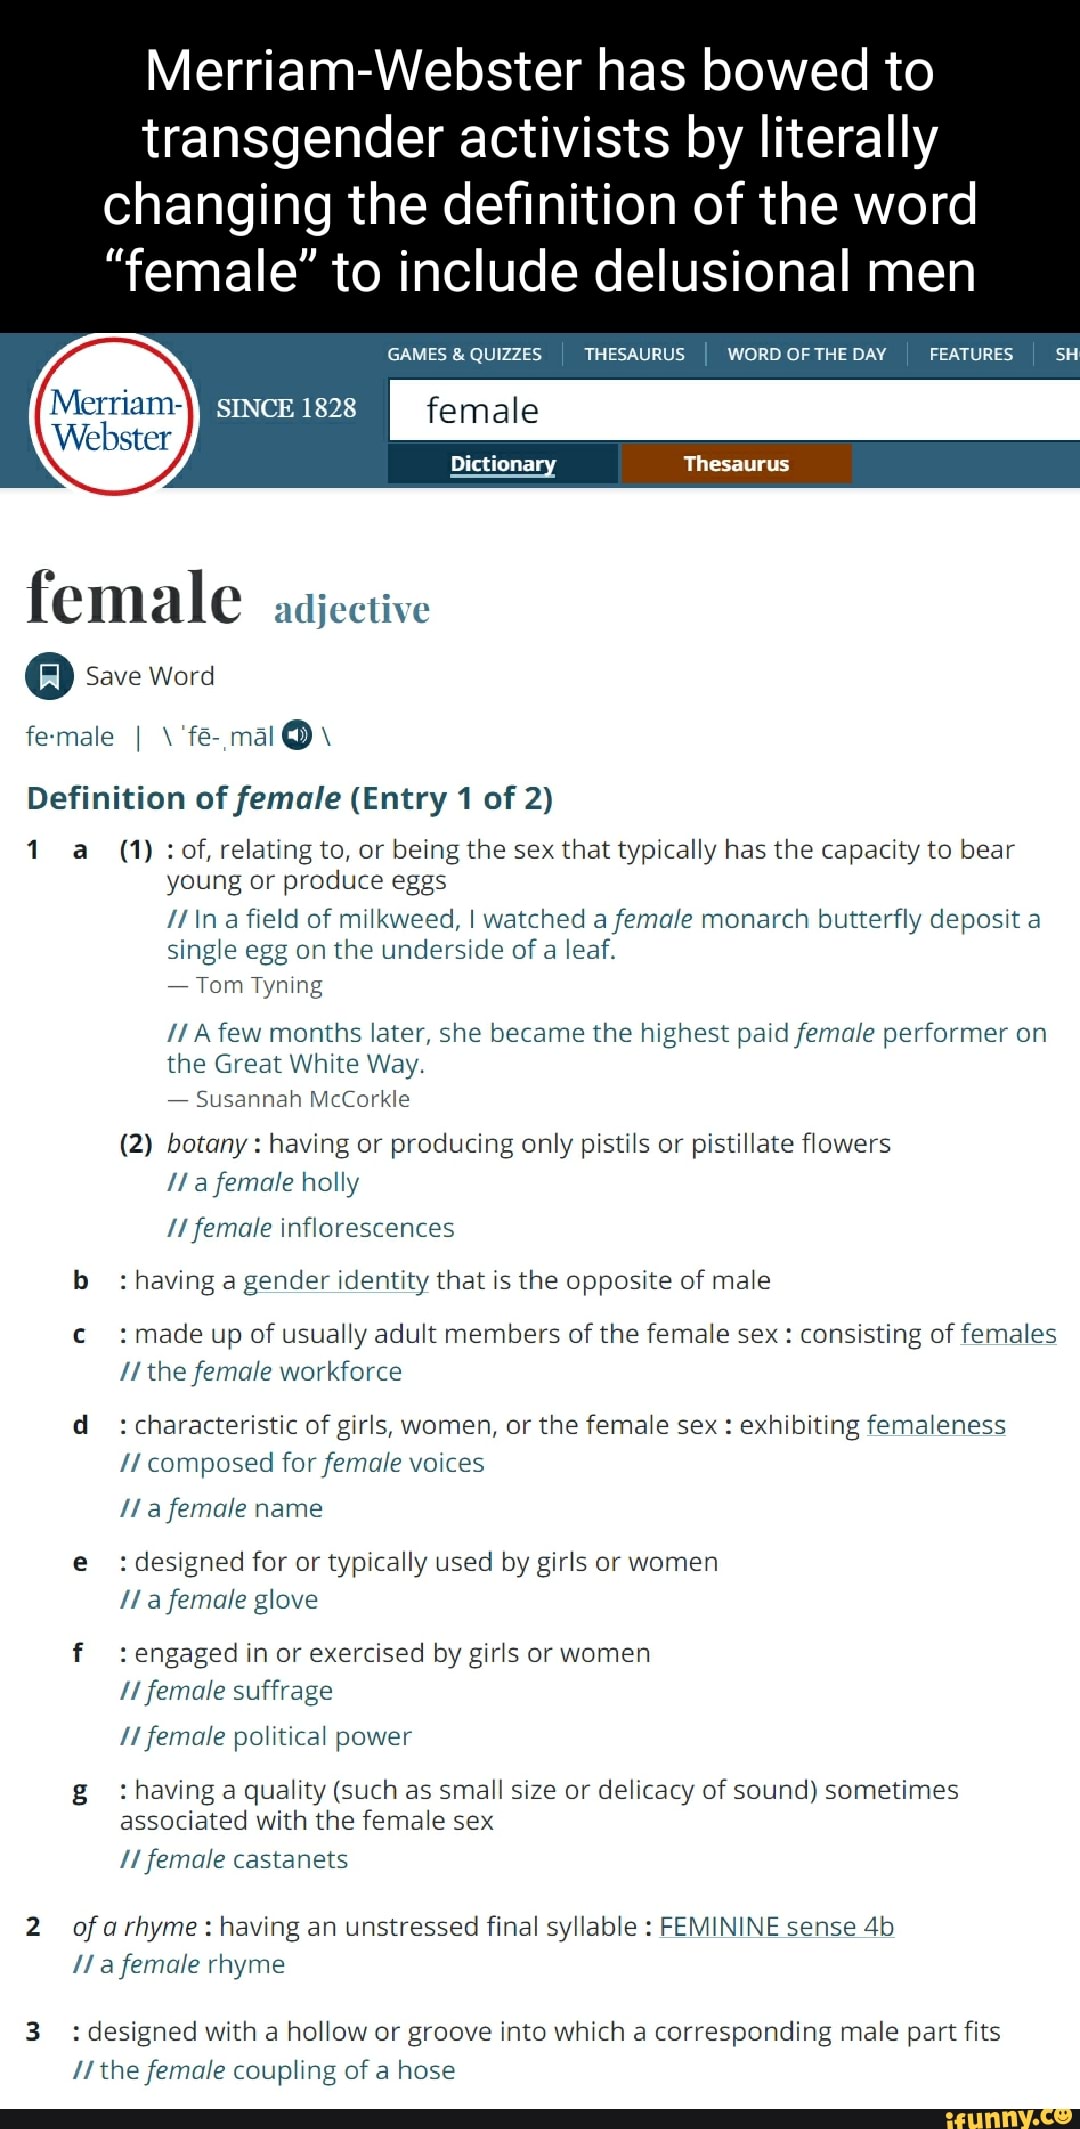 Merriam-Webster bowed to transgender activists by literally changing definition of word "female"